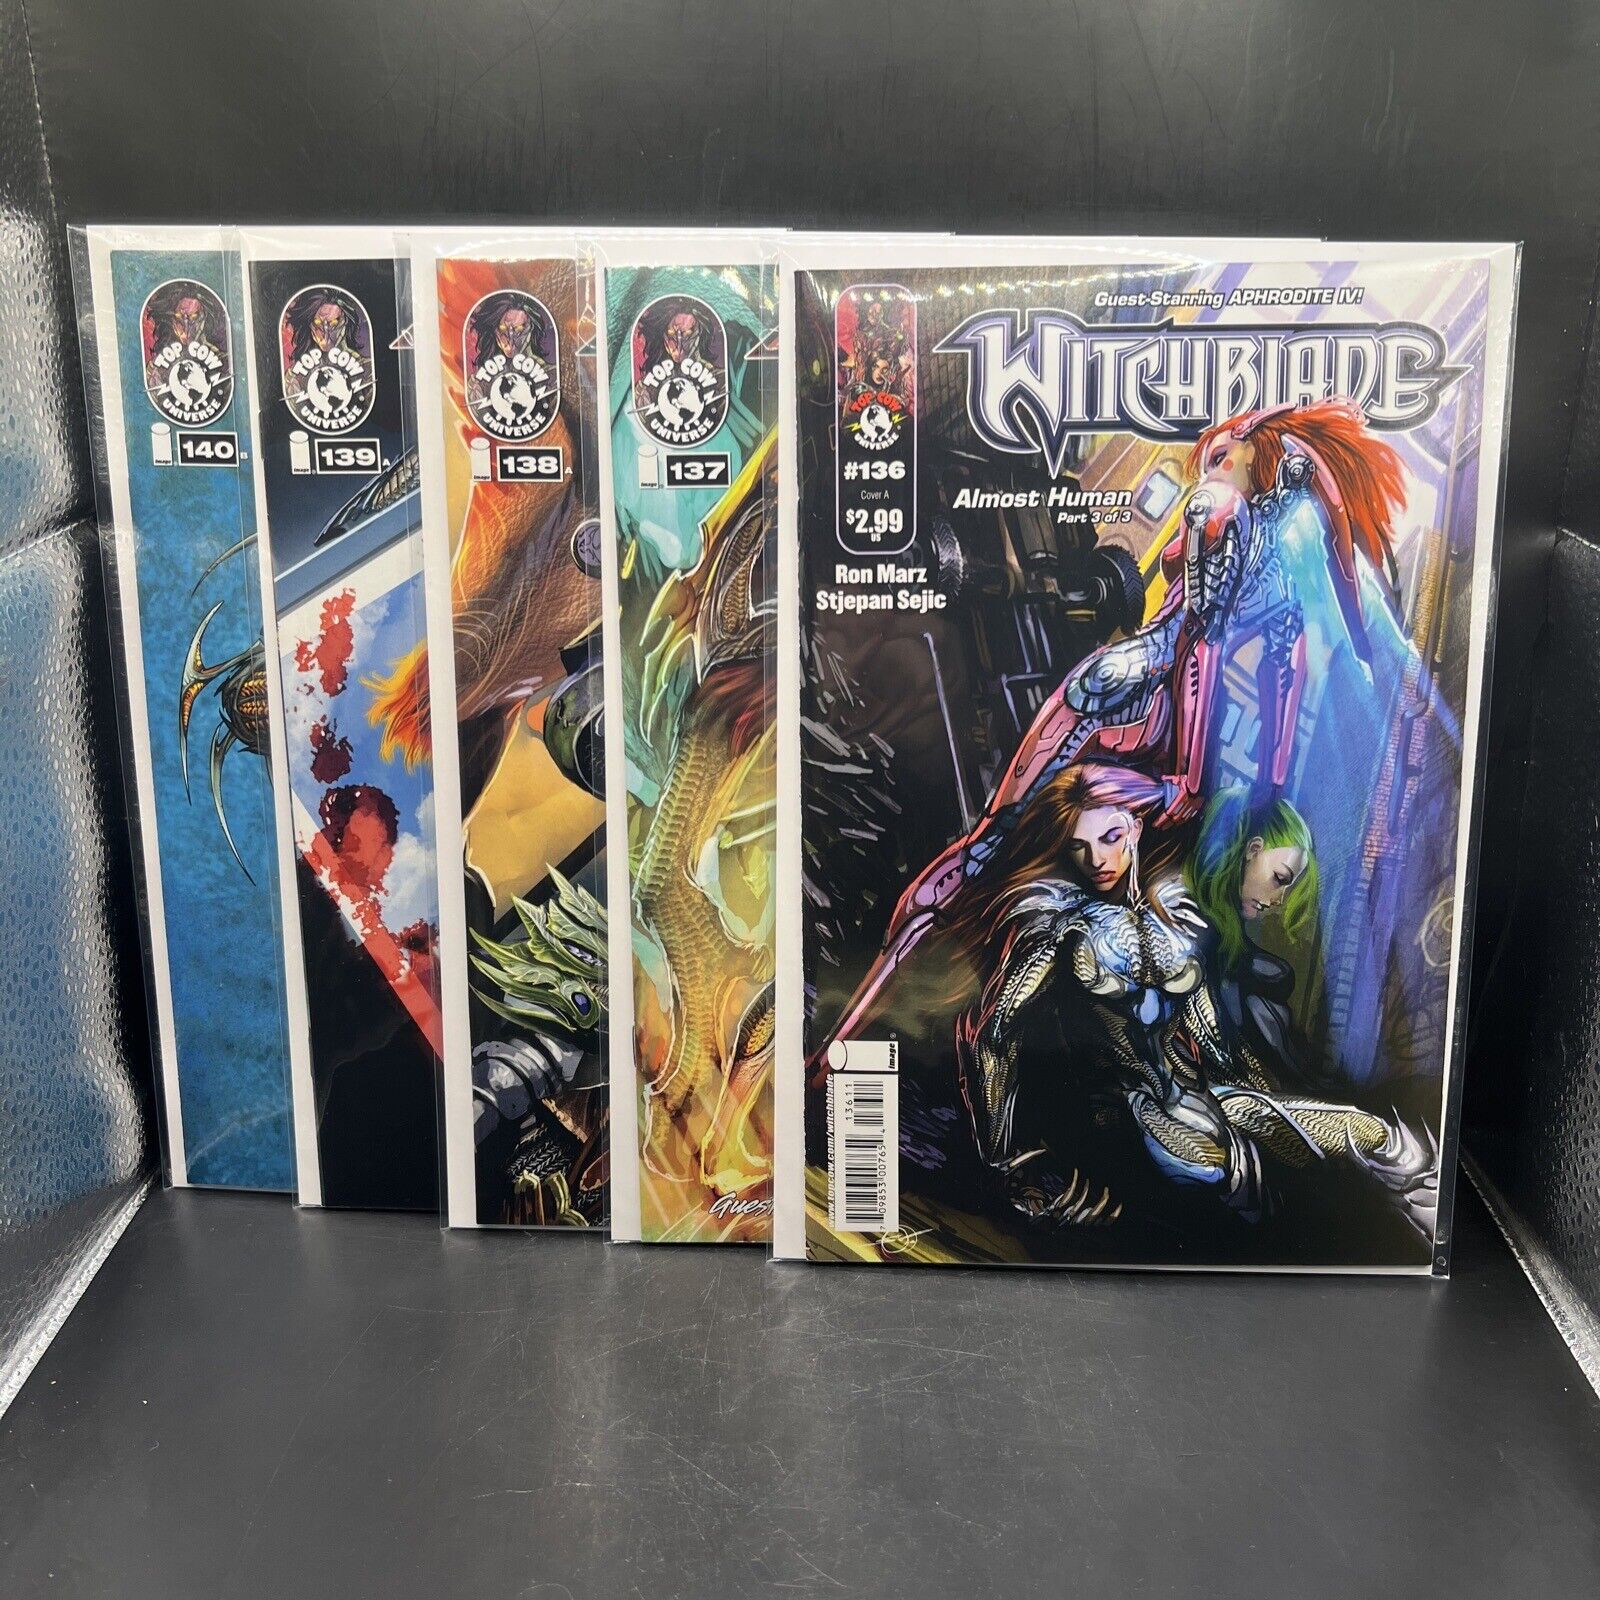 TOP COW/IMAGE WITCHBLADE Issue #’s 136 137 138 139 & 140. 5 Book Lot. (B27)(12)